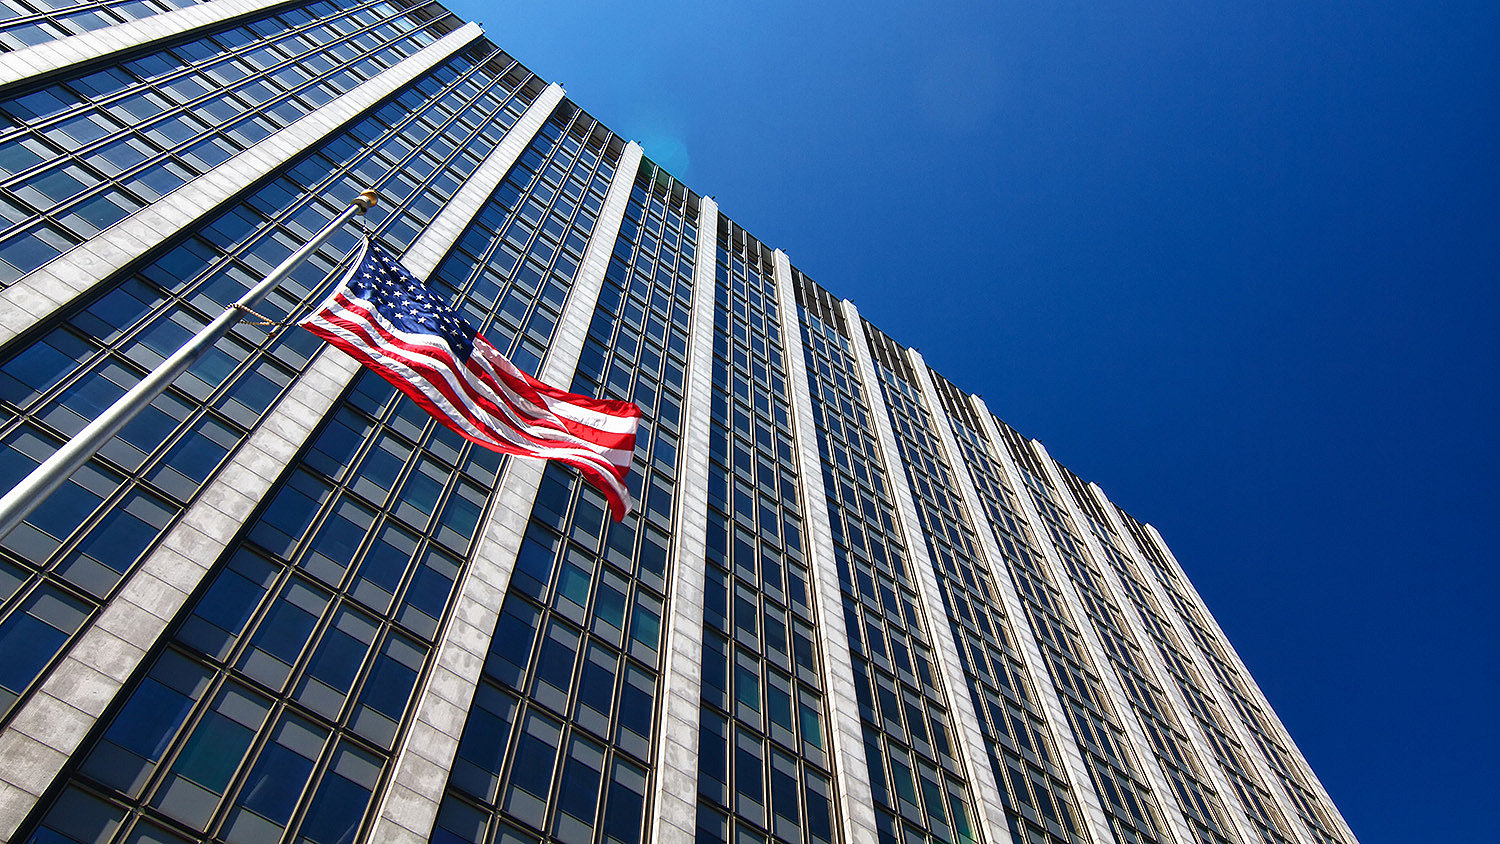 Photograph of US office building with a US flag